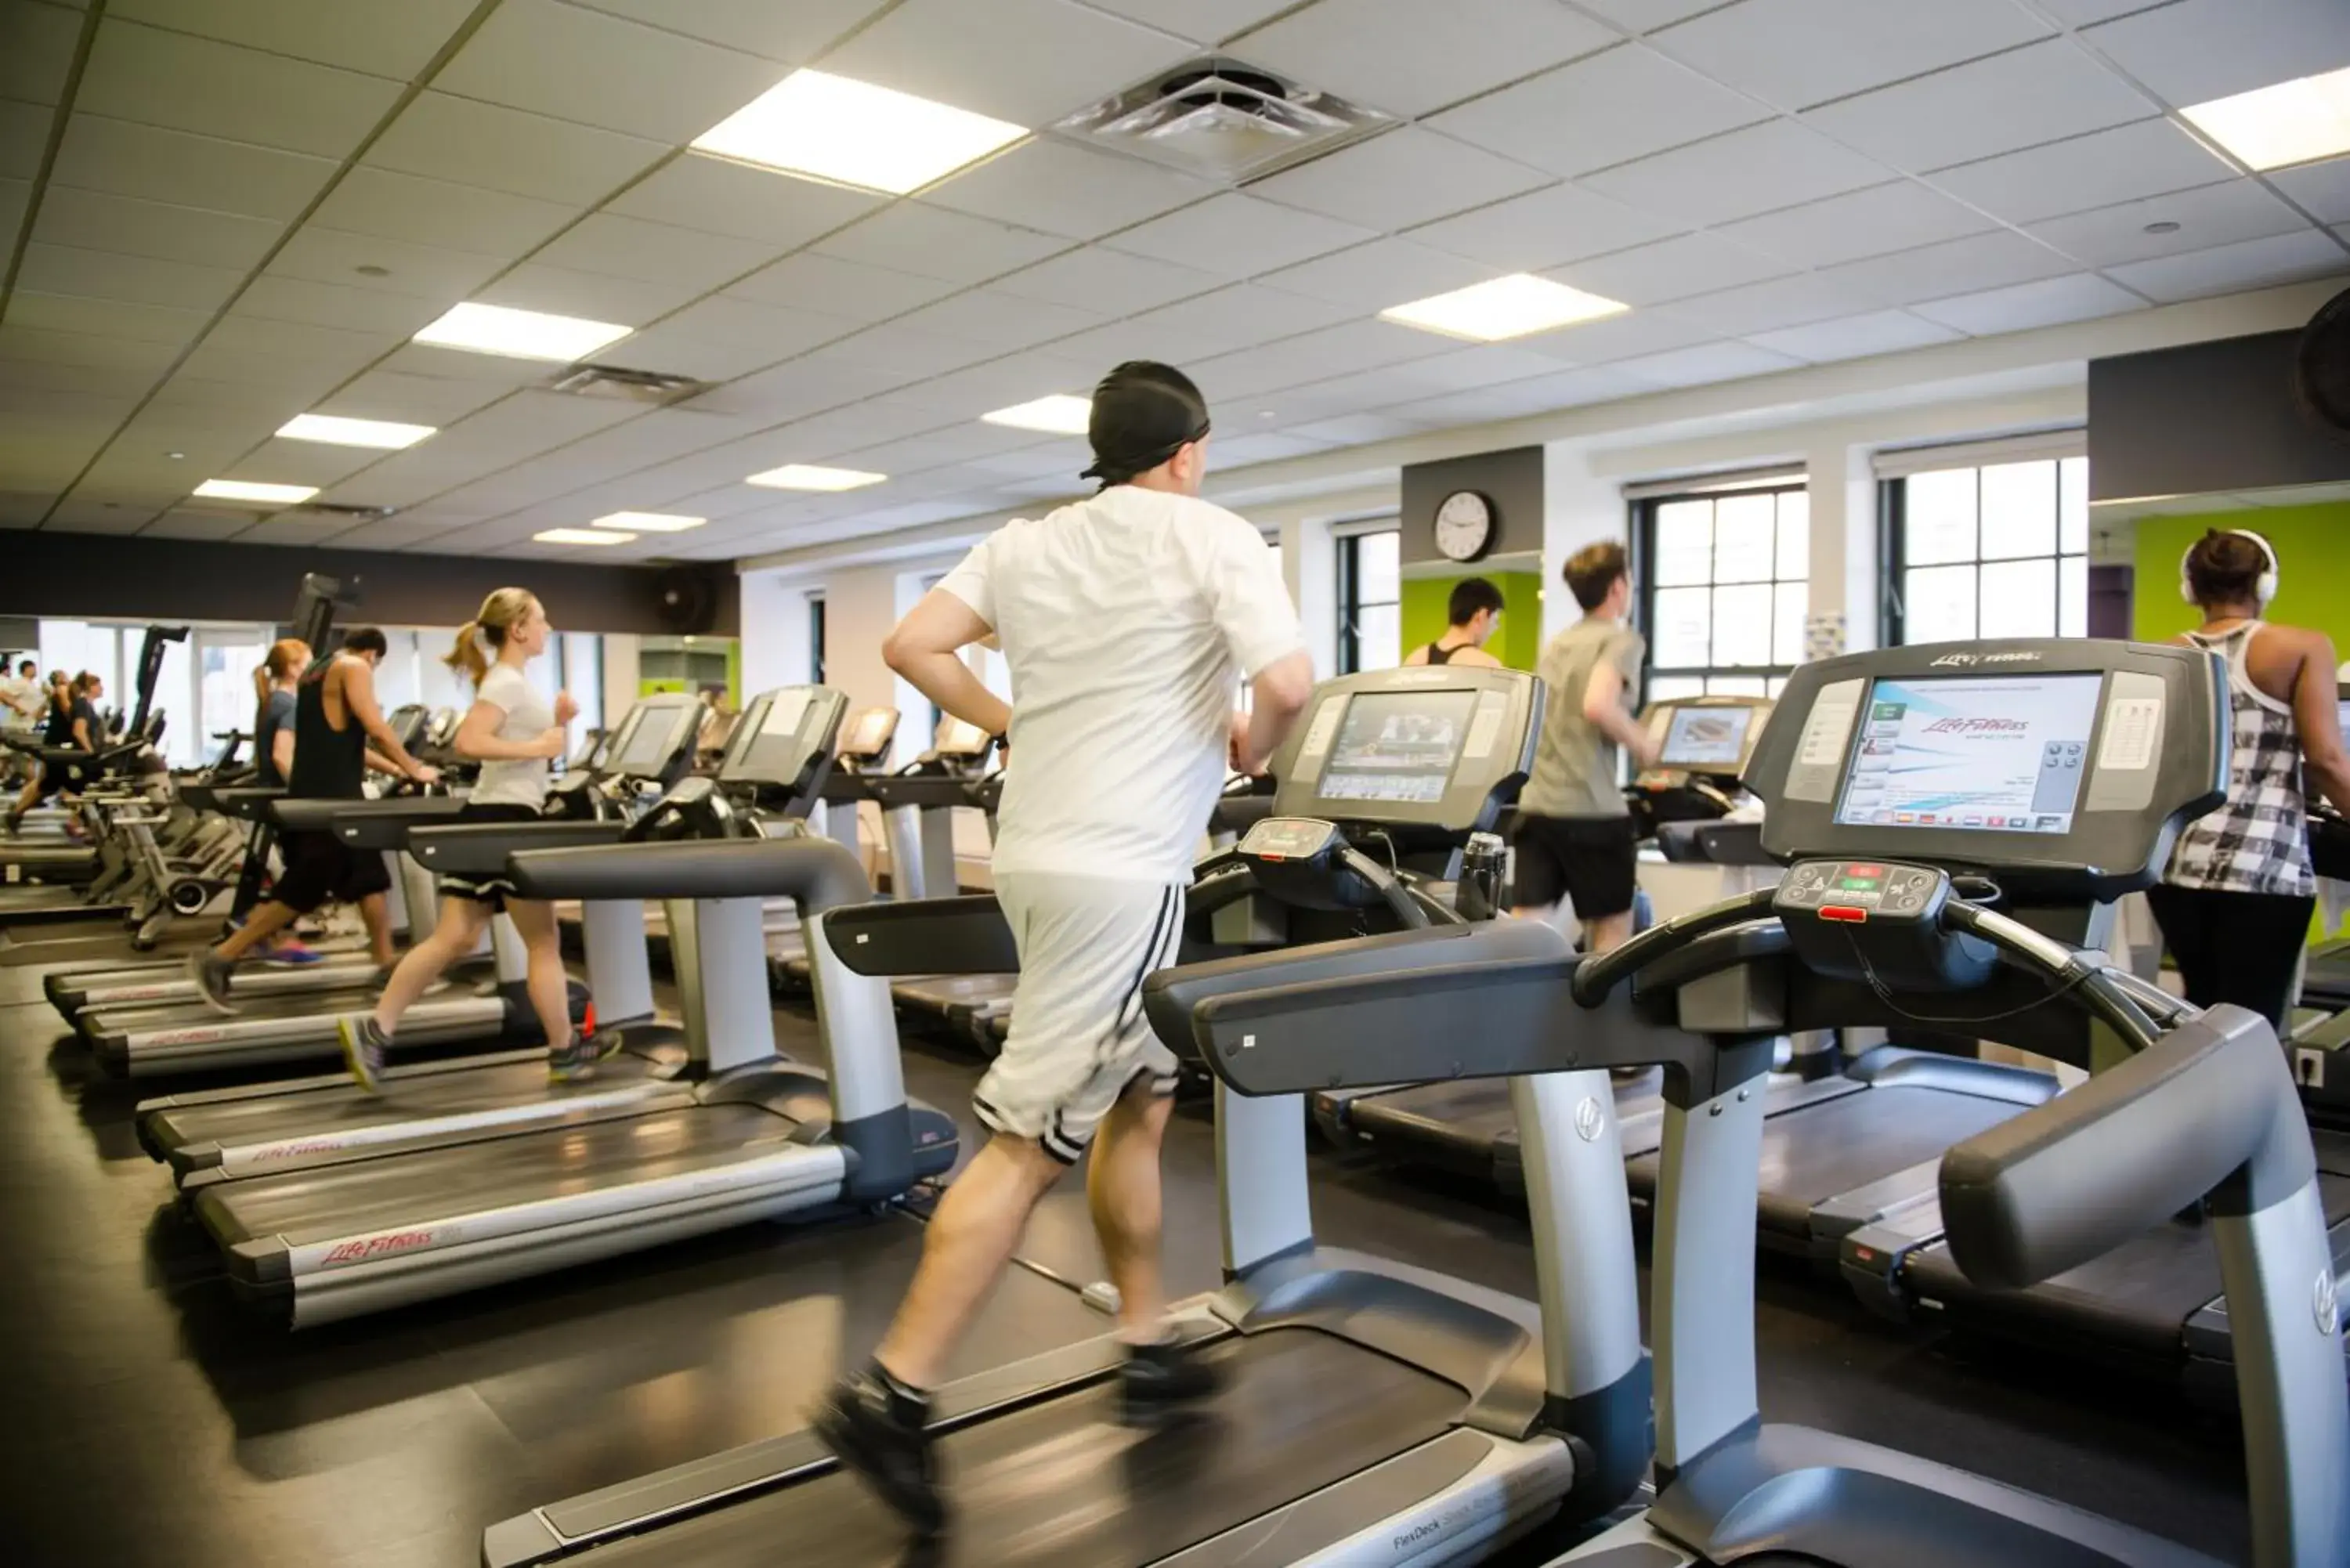 Fitness centre/facilities, Fitness Center/Facilities in West Side YMCA